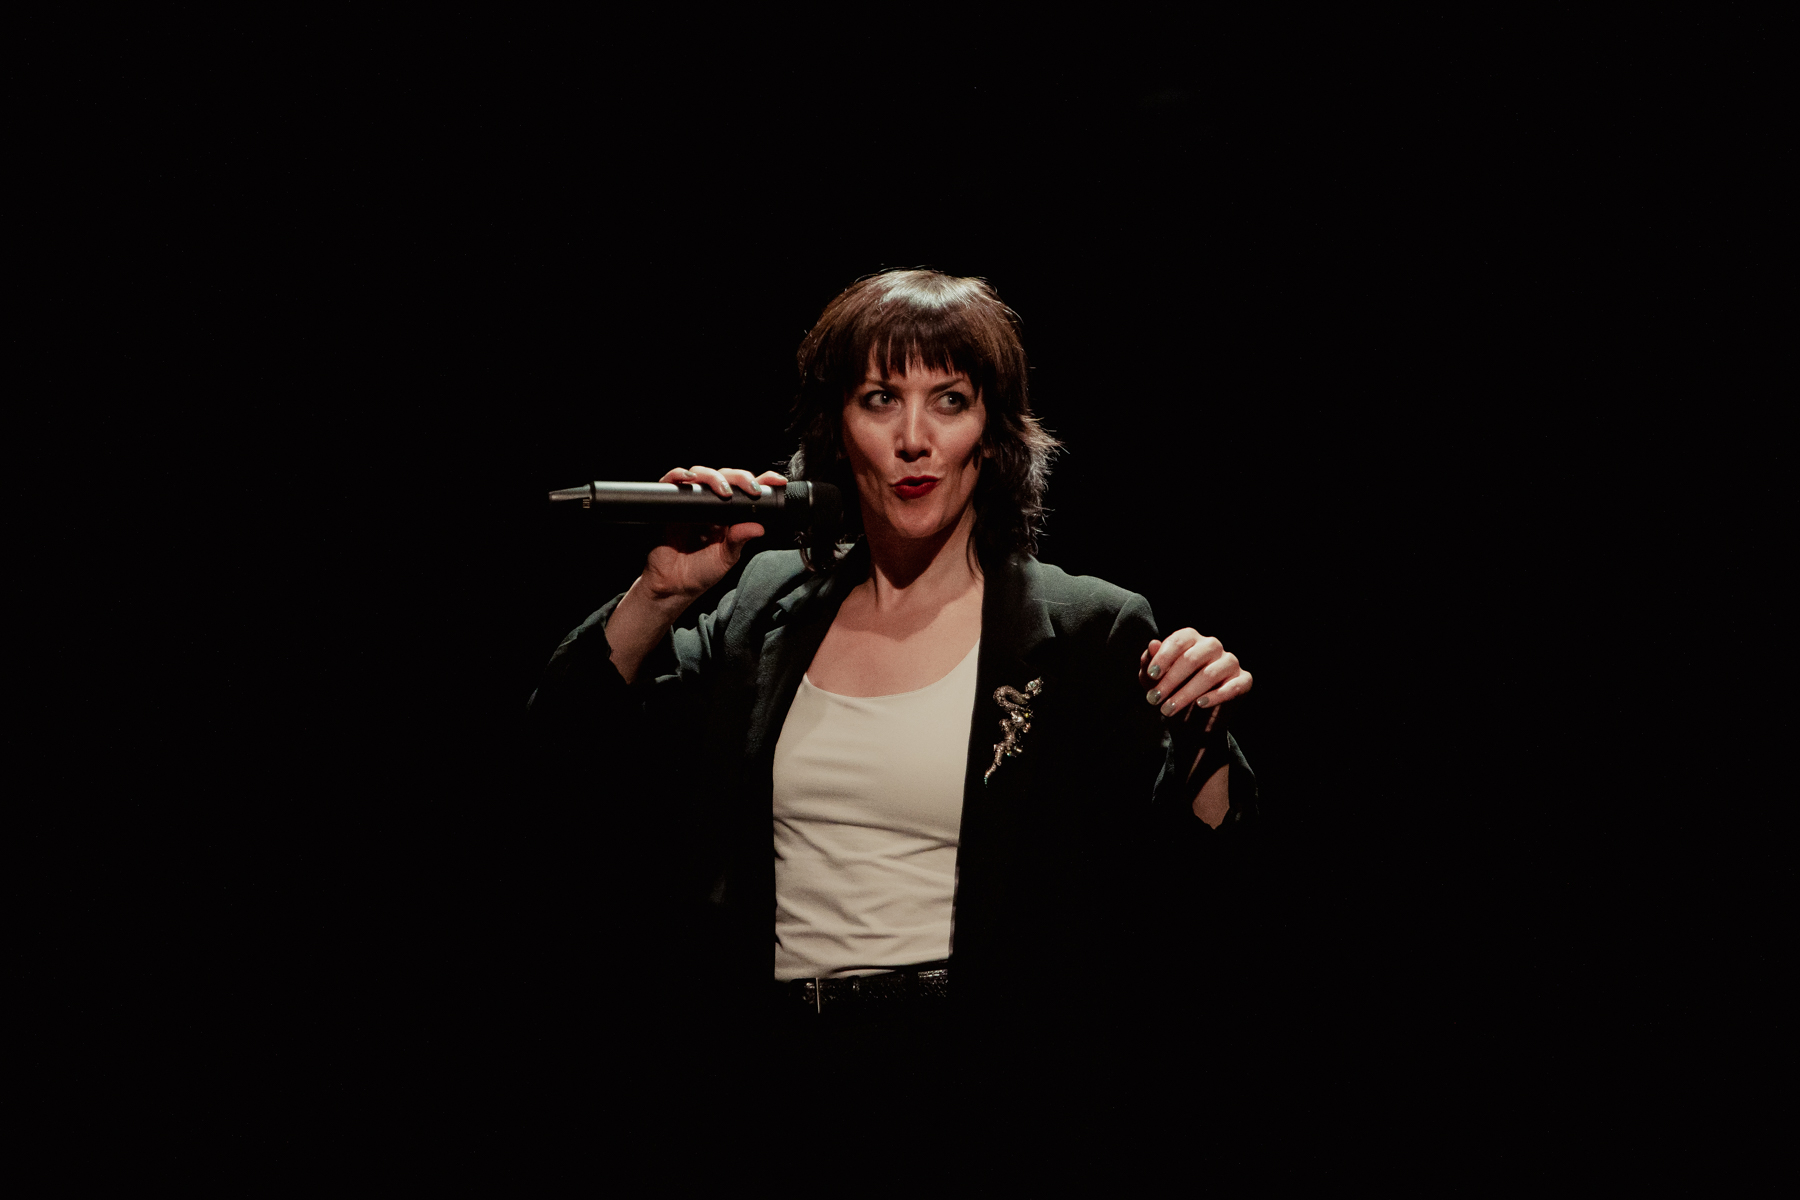 Actress Deborah Pugh is wearing a white vest and a black blazer with a snake brooch. She is holding the mic next to her lips with her right hand. Photo taken by Camilla Adams.